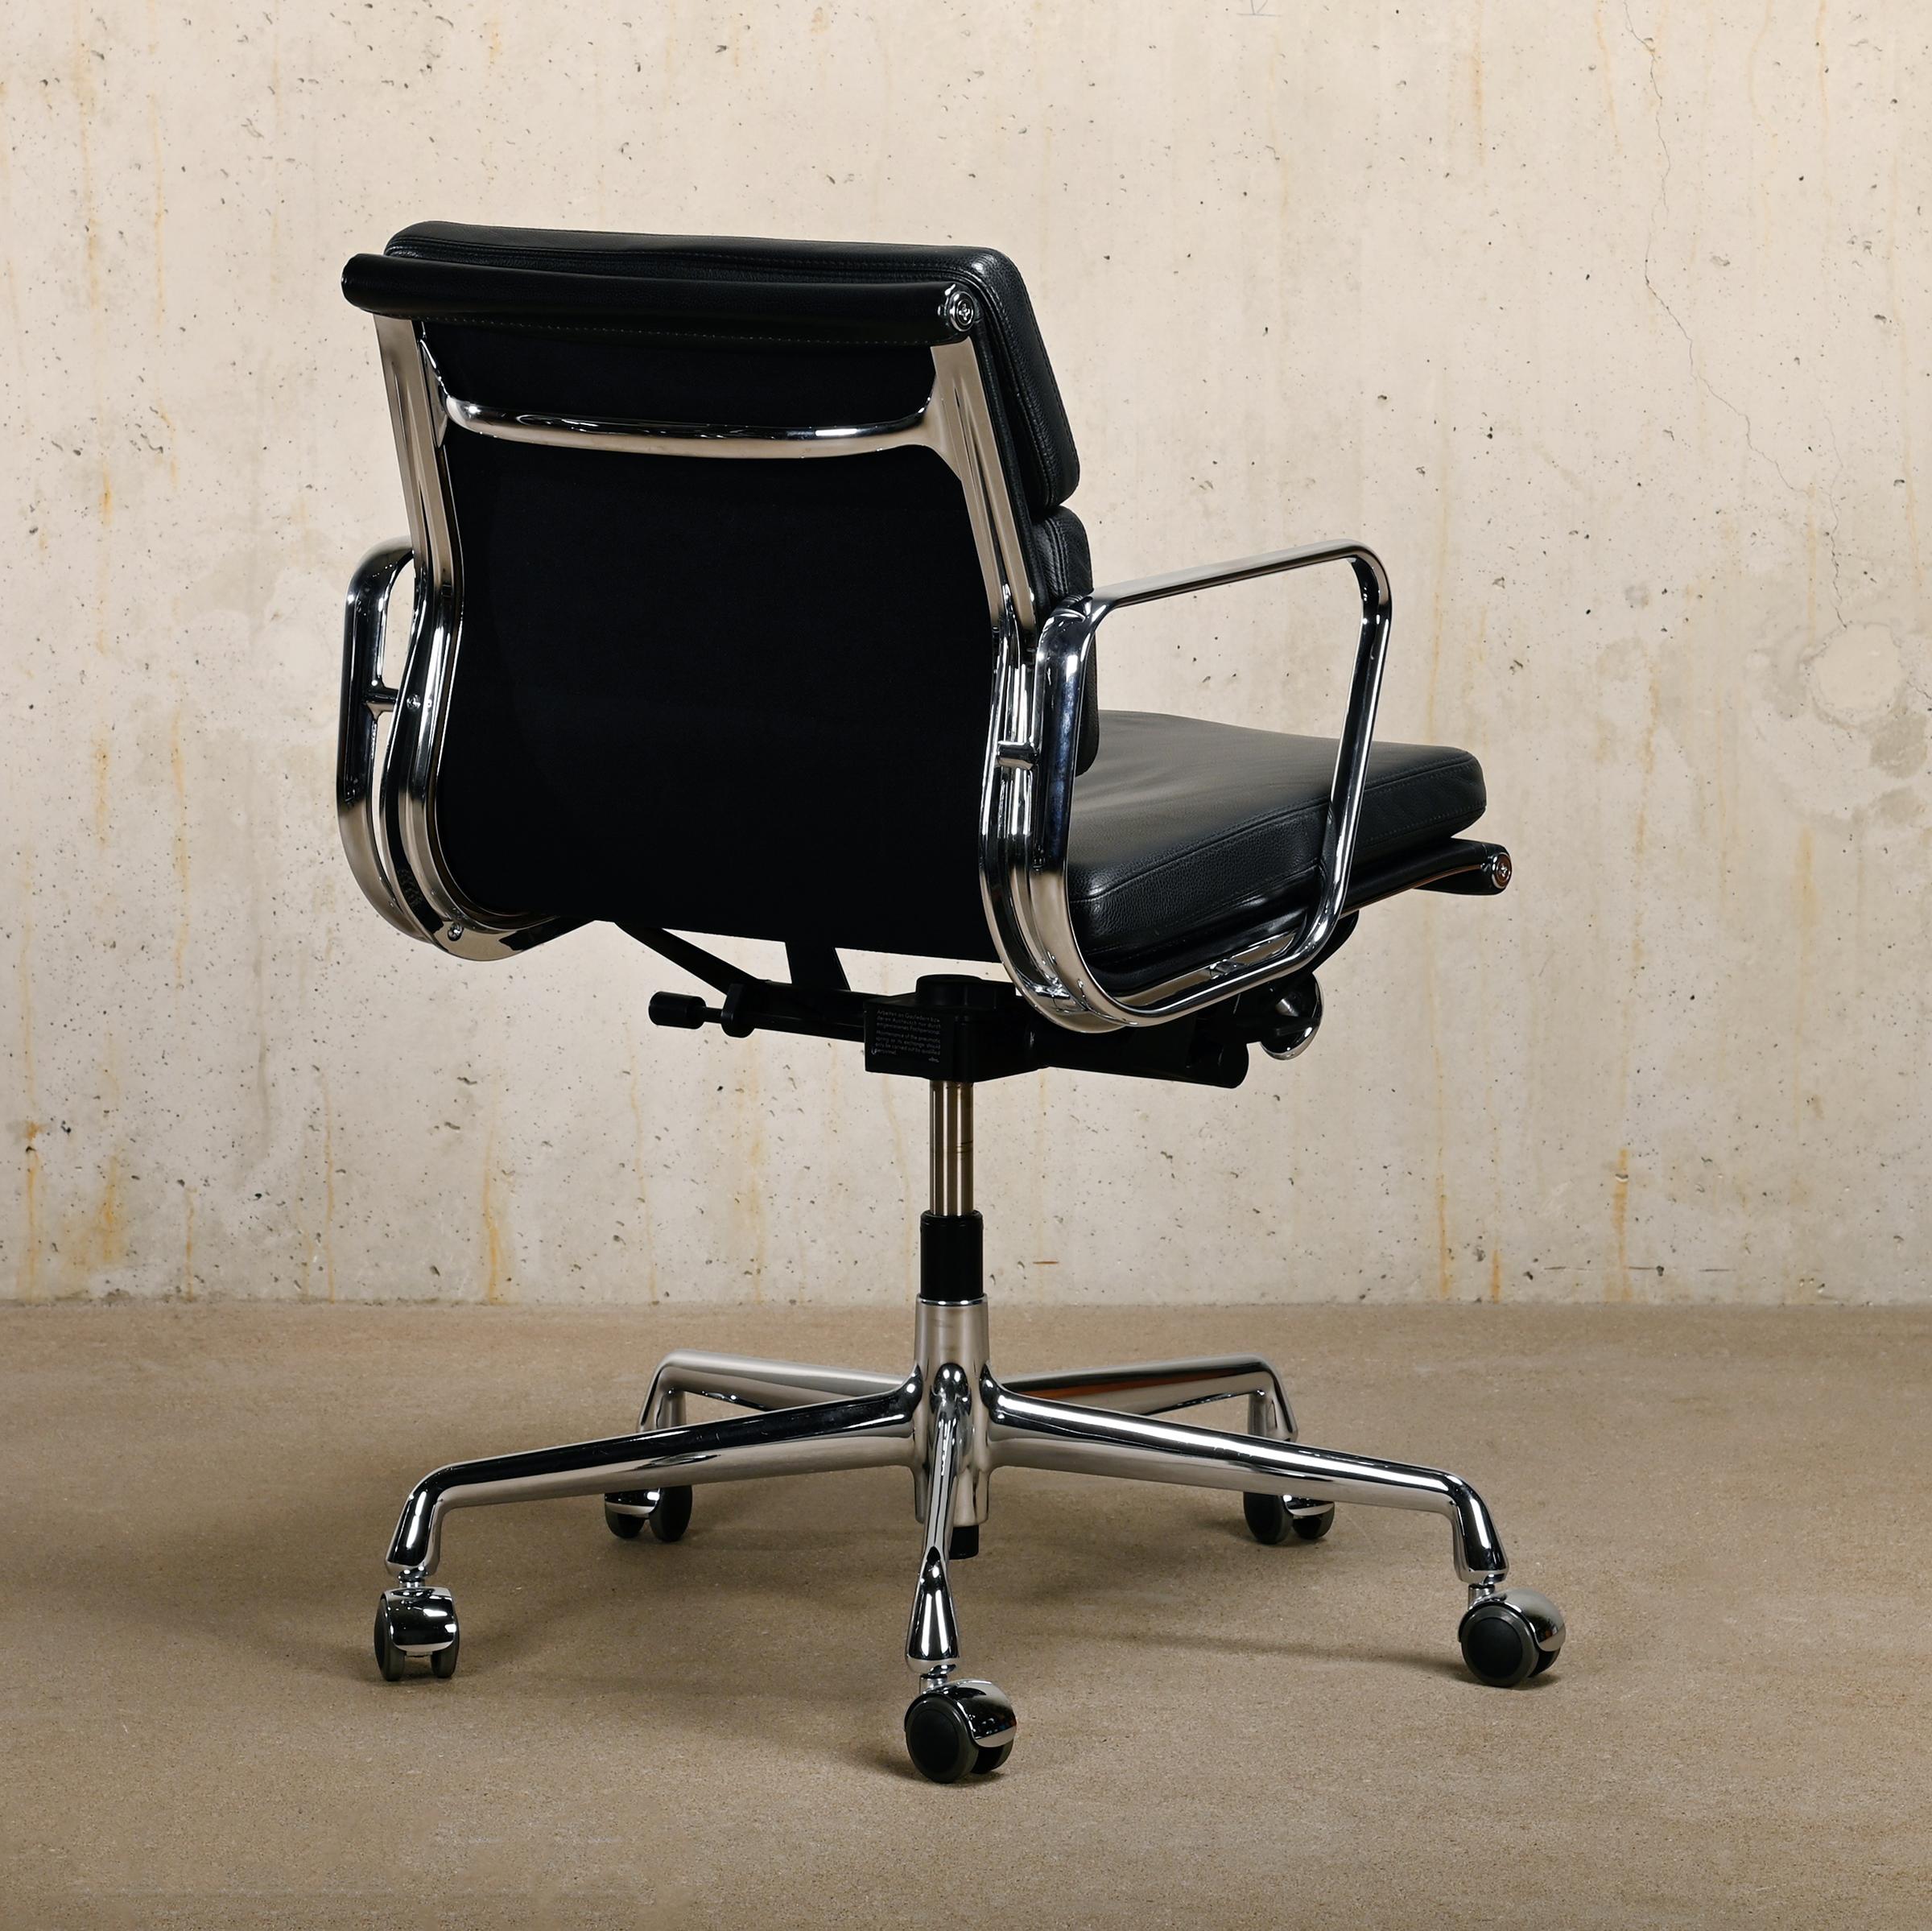 Charles & Ray Eames EA217 Office Chair in Chrome and Black leather, Vitra In Good Condition For Sale In Amsterdam, NL